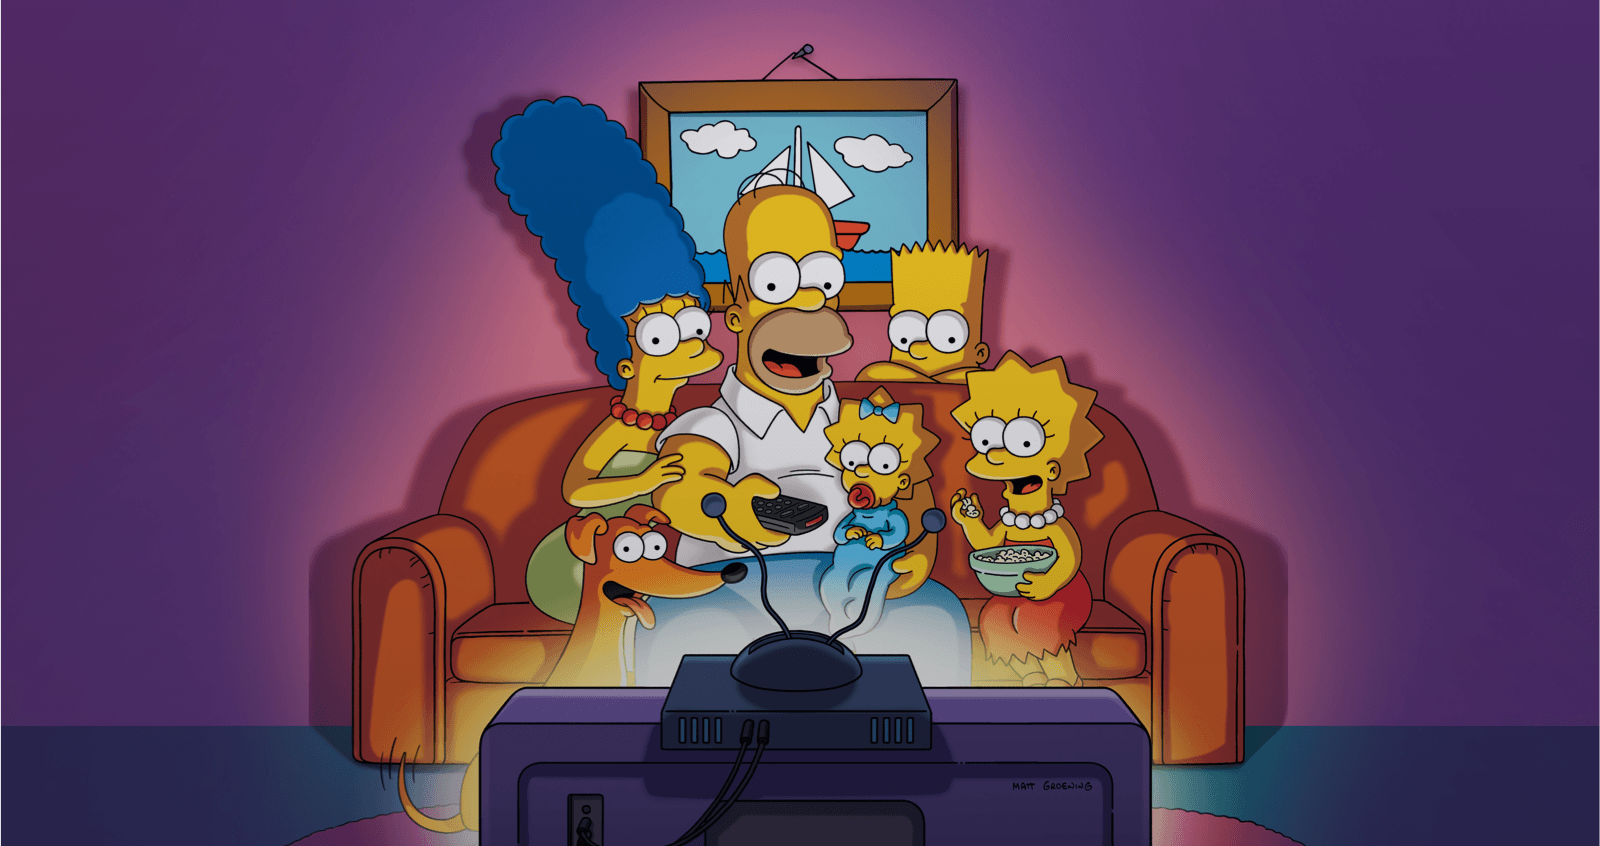 Update: The Simpsons is Not Coming to An End According to Show Writer Al Jean